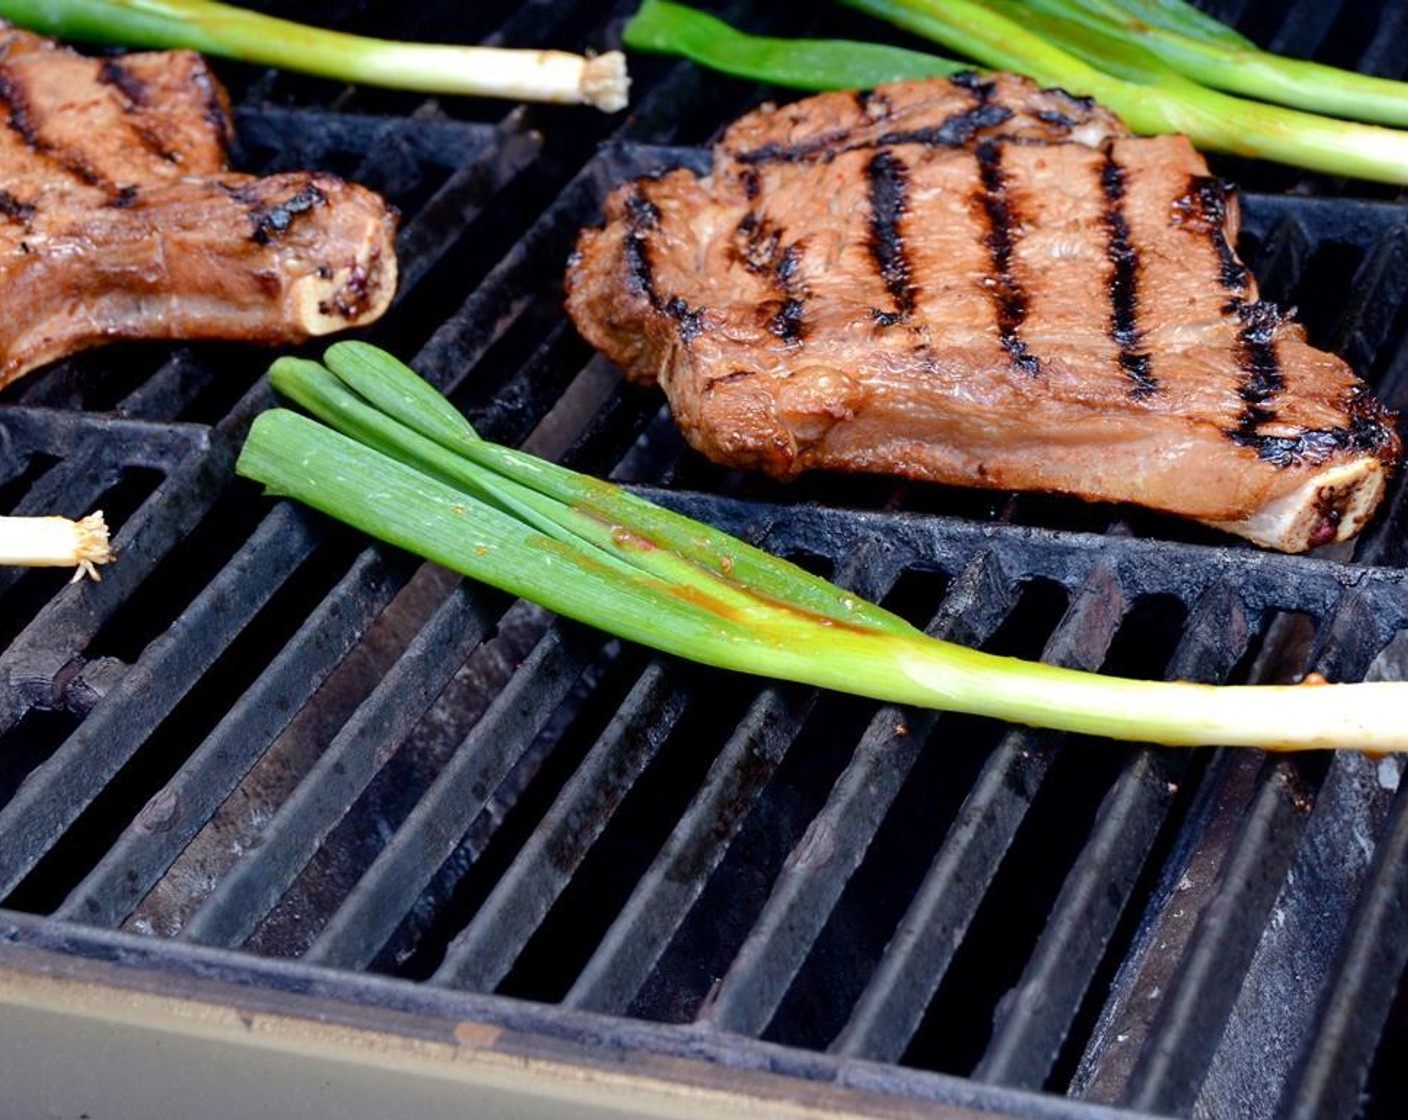 step 13 Cook steaks for 7 to 9 minutes for medium rare - medium, turning them about halfway through the cooking. Grill the green onions for about 5 minutes total. Baste both the steak and the green onions with reserved marinade.